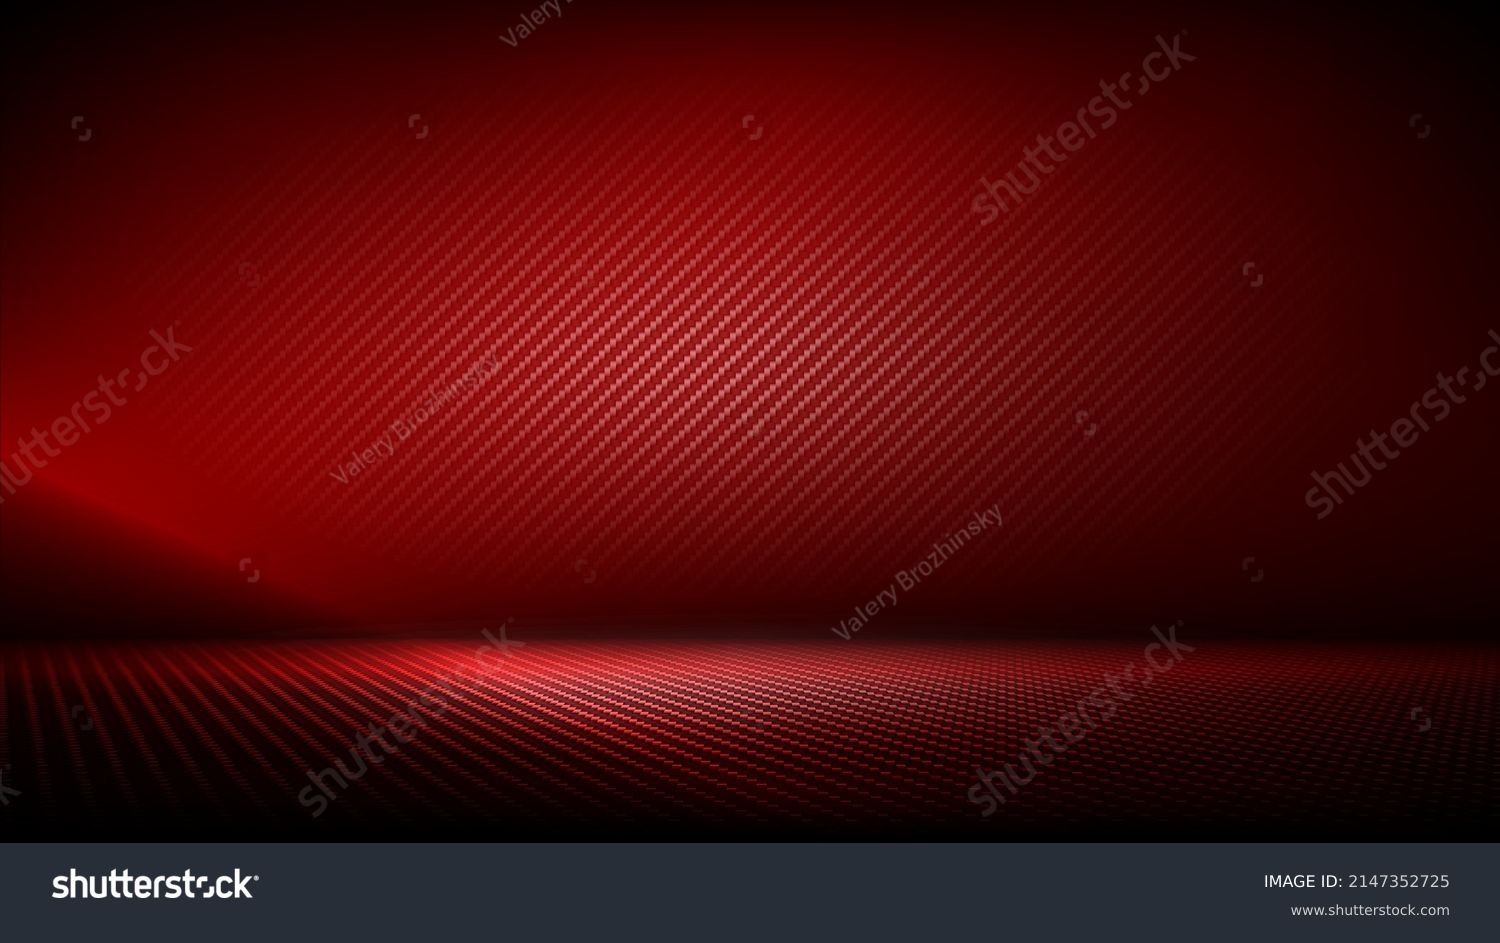 SVG of Studio interior with carbon fiber texture. Modern carbon fiber textured red black interior with light. Background for mounting, product placement. Vector background, template, mockup svg